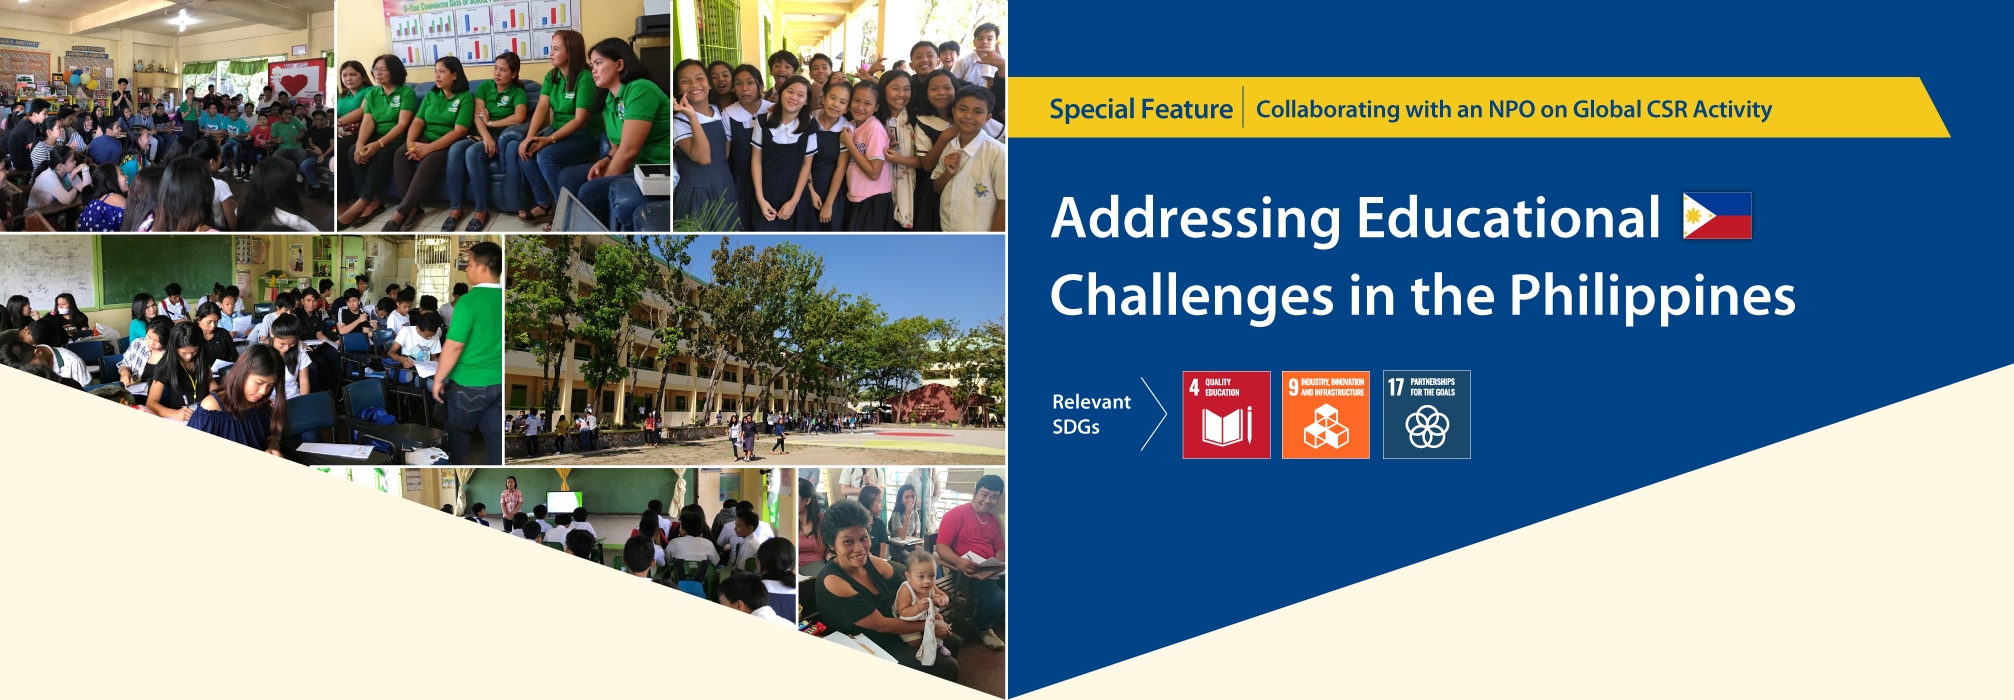 Addressing Educational Challenges in the Philippines